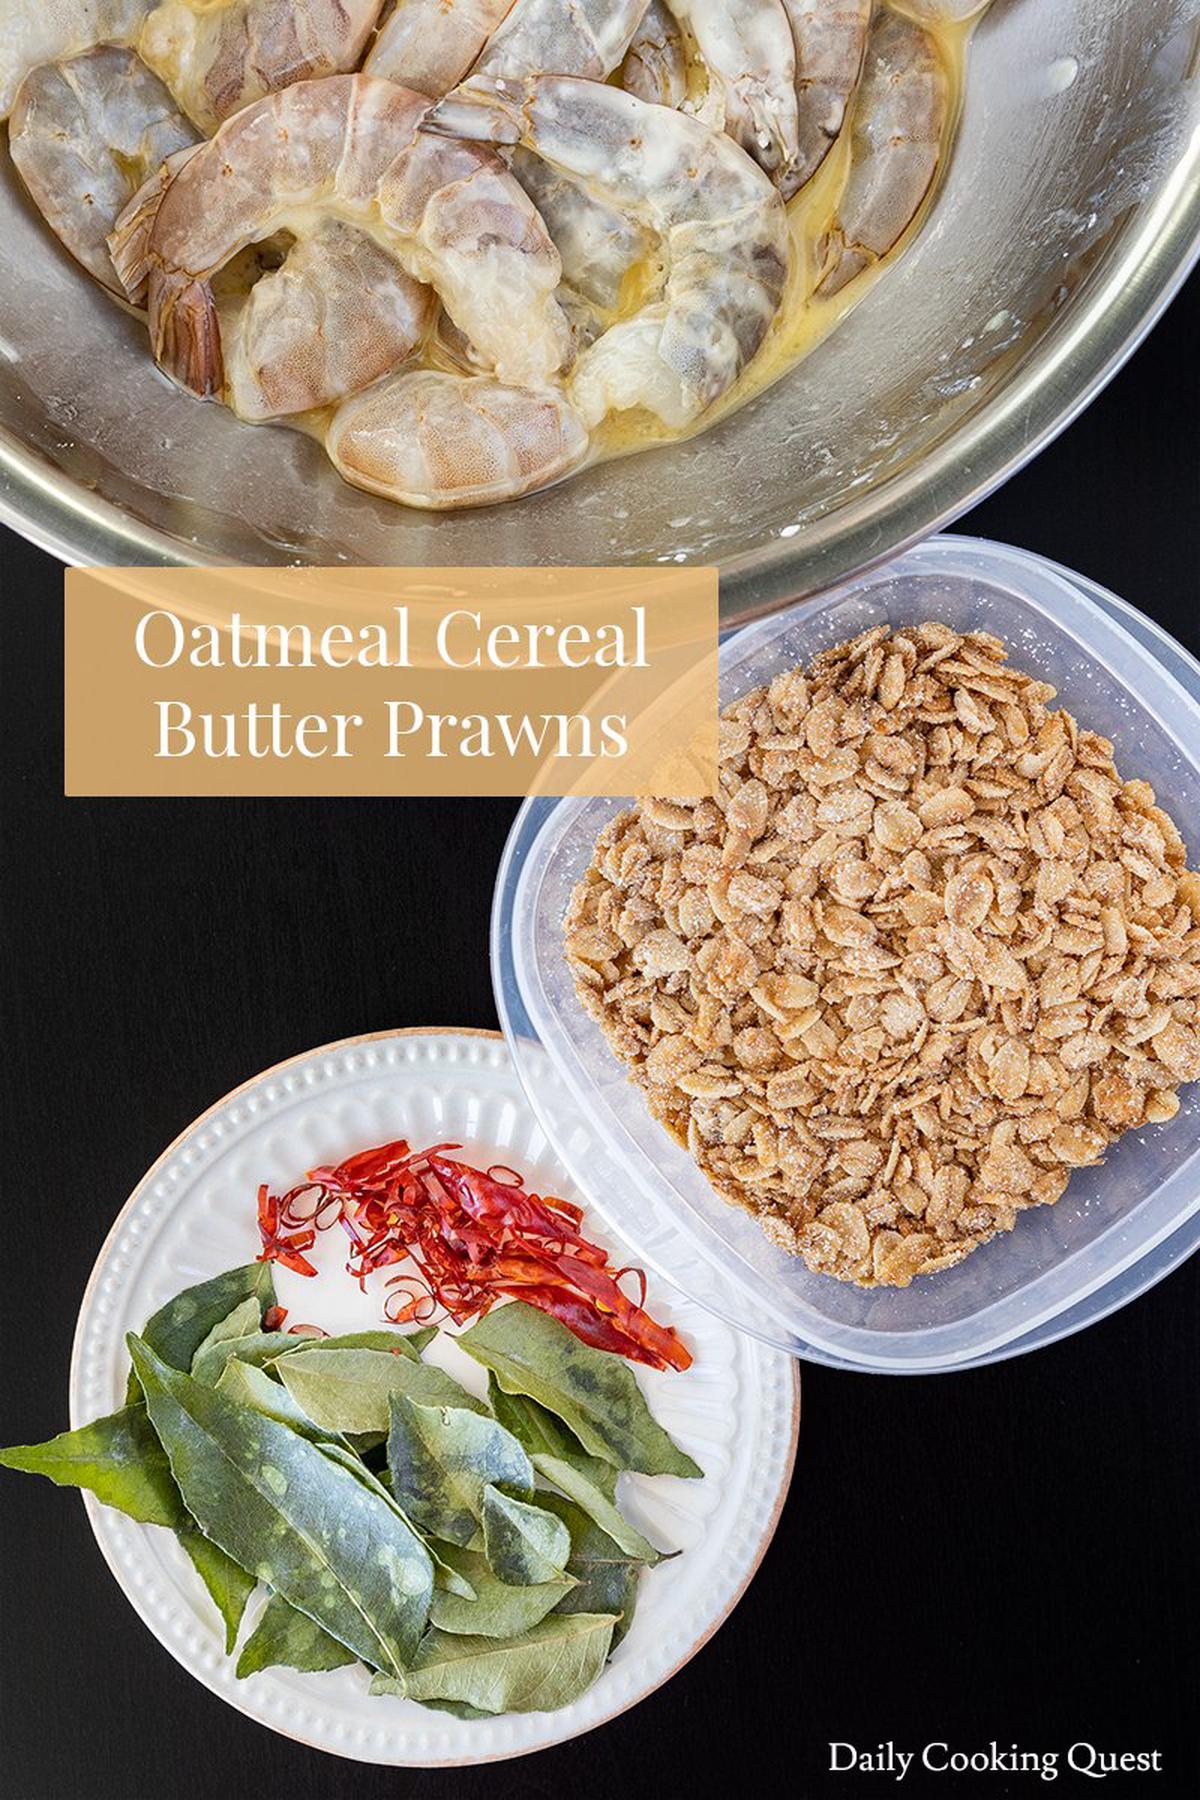 Oatmeal Cereal Butter Prawns